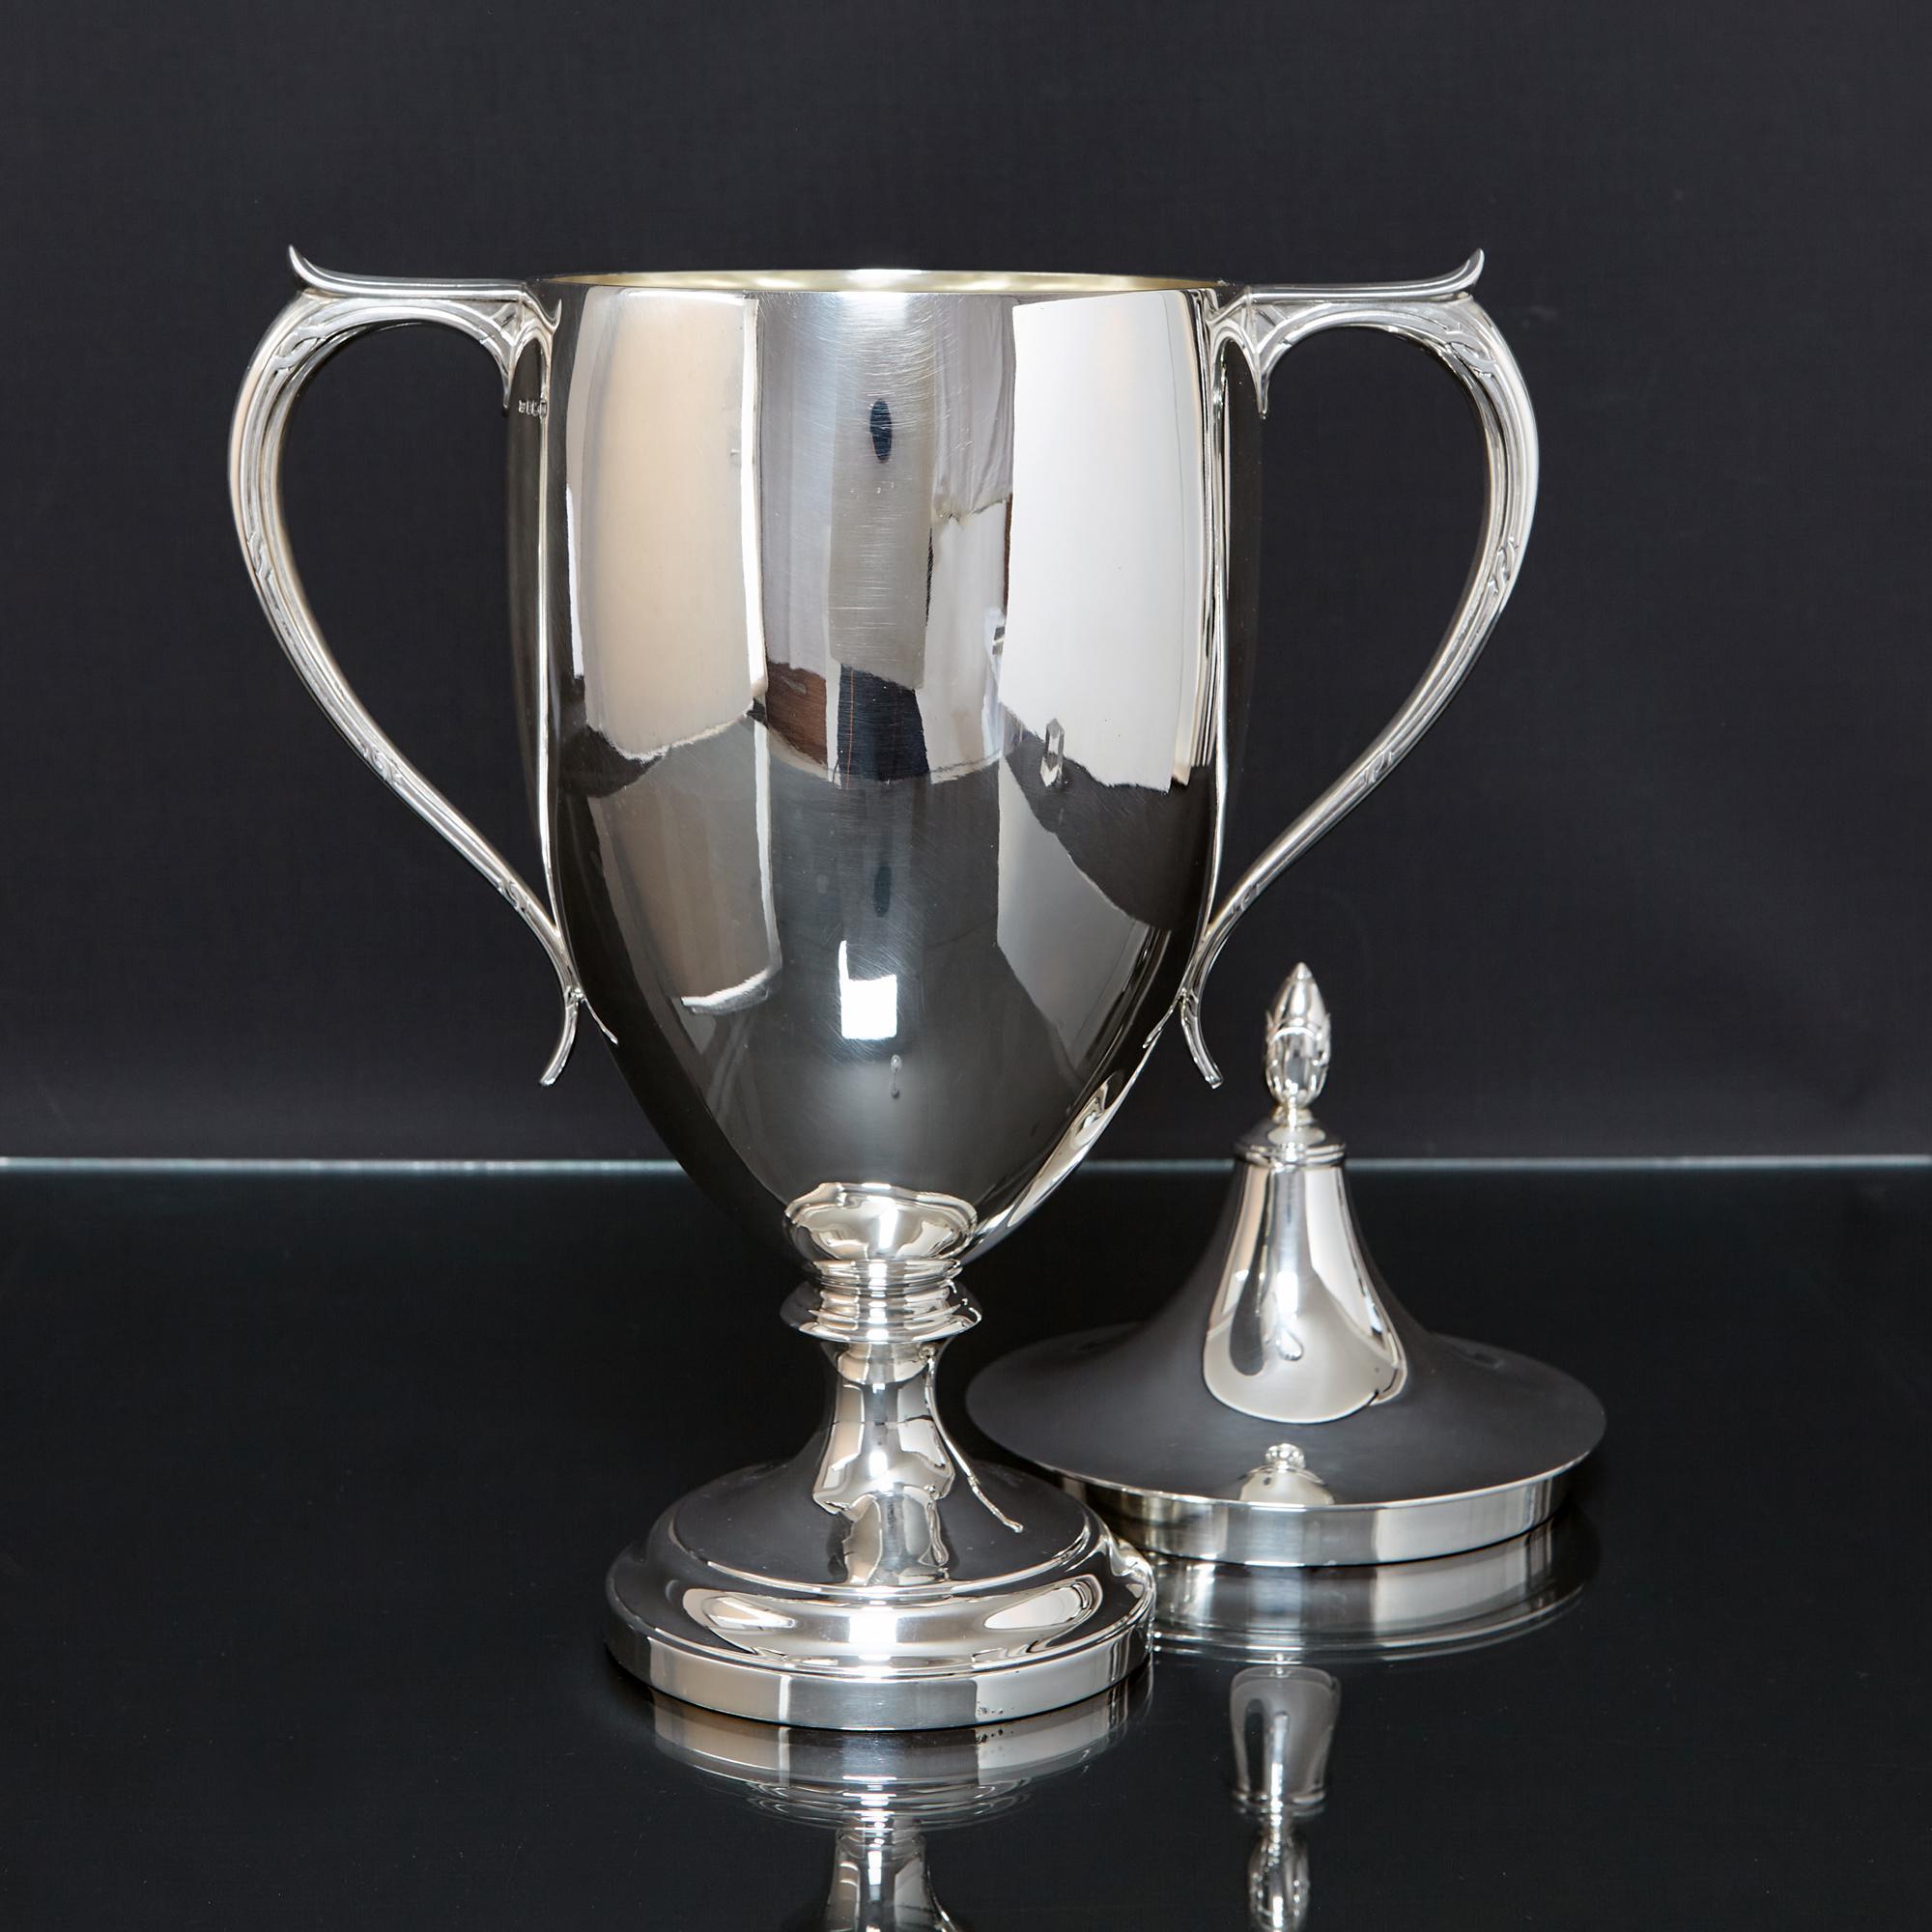 Stylish two-handled silver trophy cup and cover made in the Art Deco style and of the era. The silver trophy's elegant sweeping handles and finial are decorated with simple interwoven ribbons; a nod to the Art Deco period, making this a really